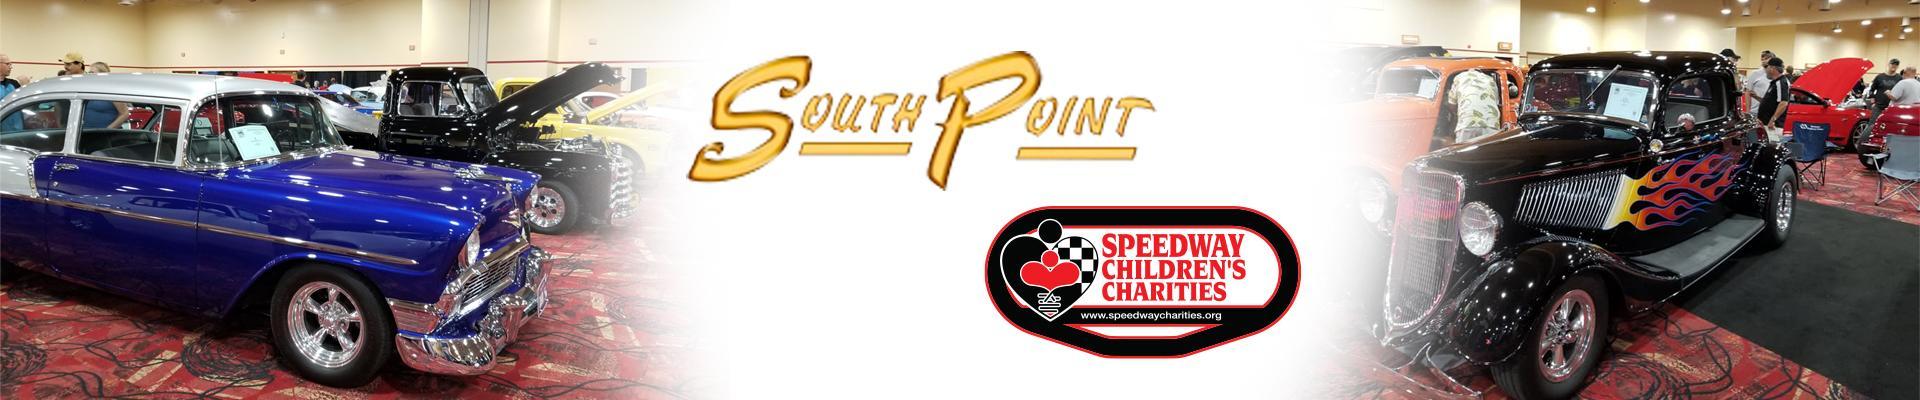 South Point Car and Truck Show Header